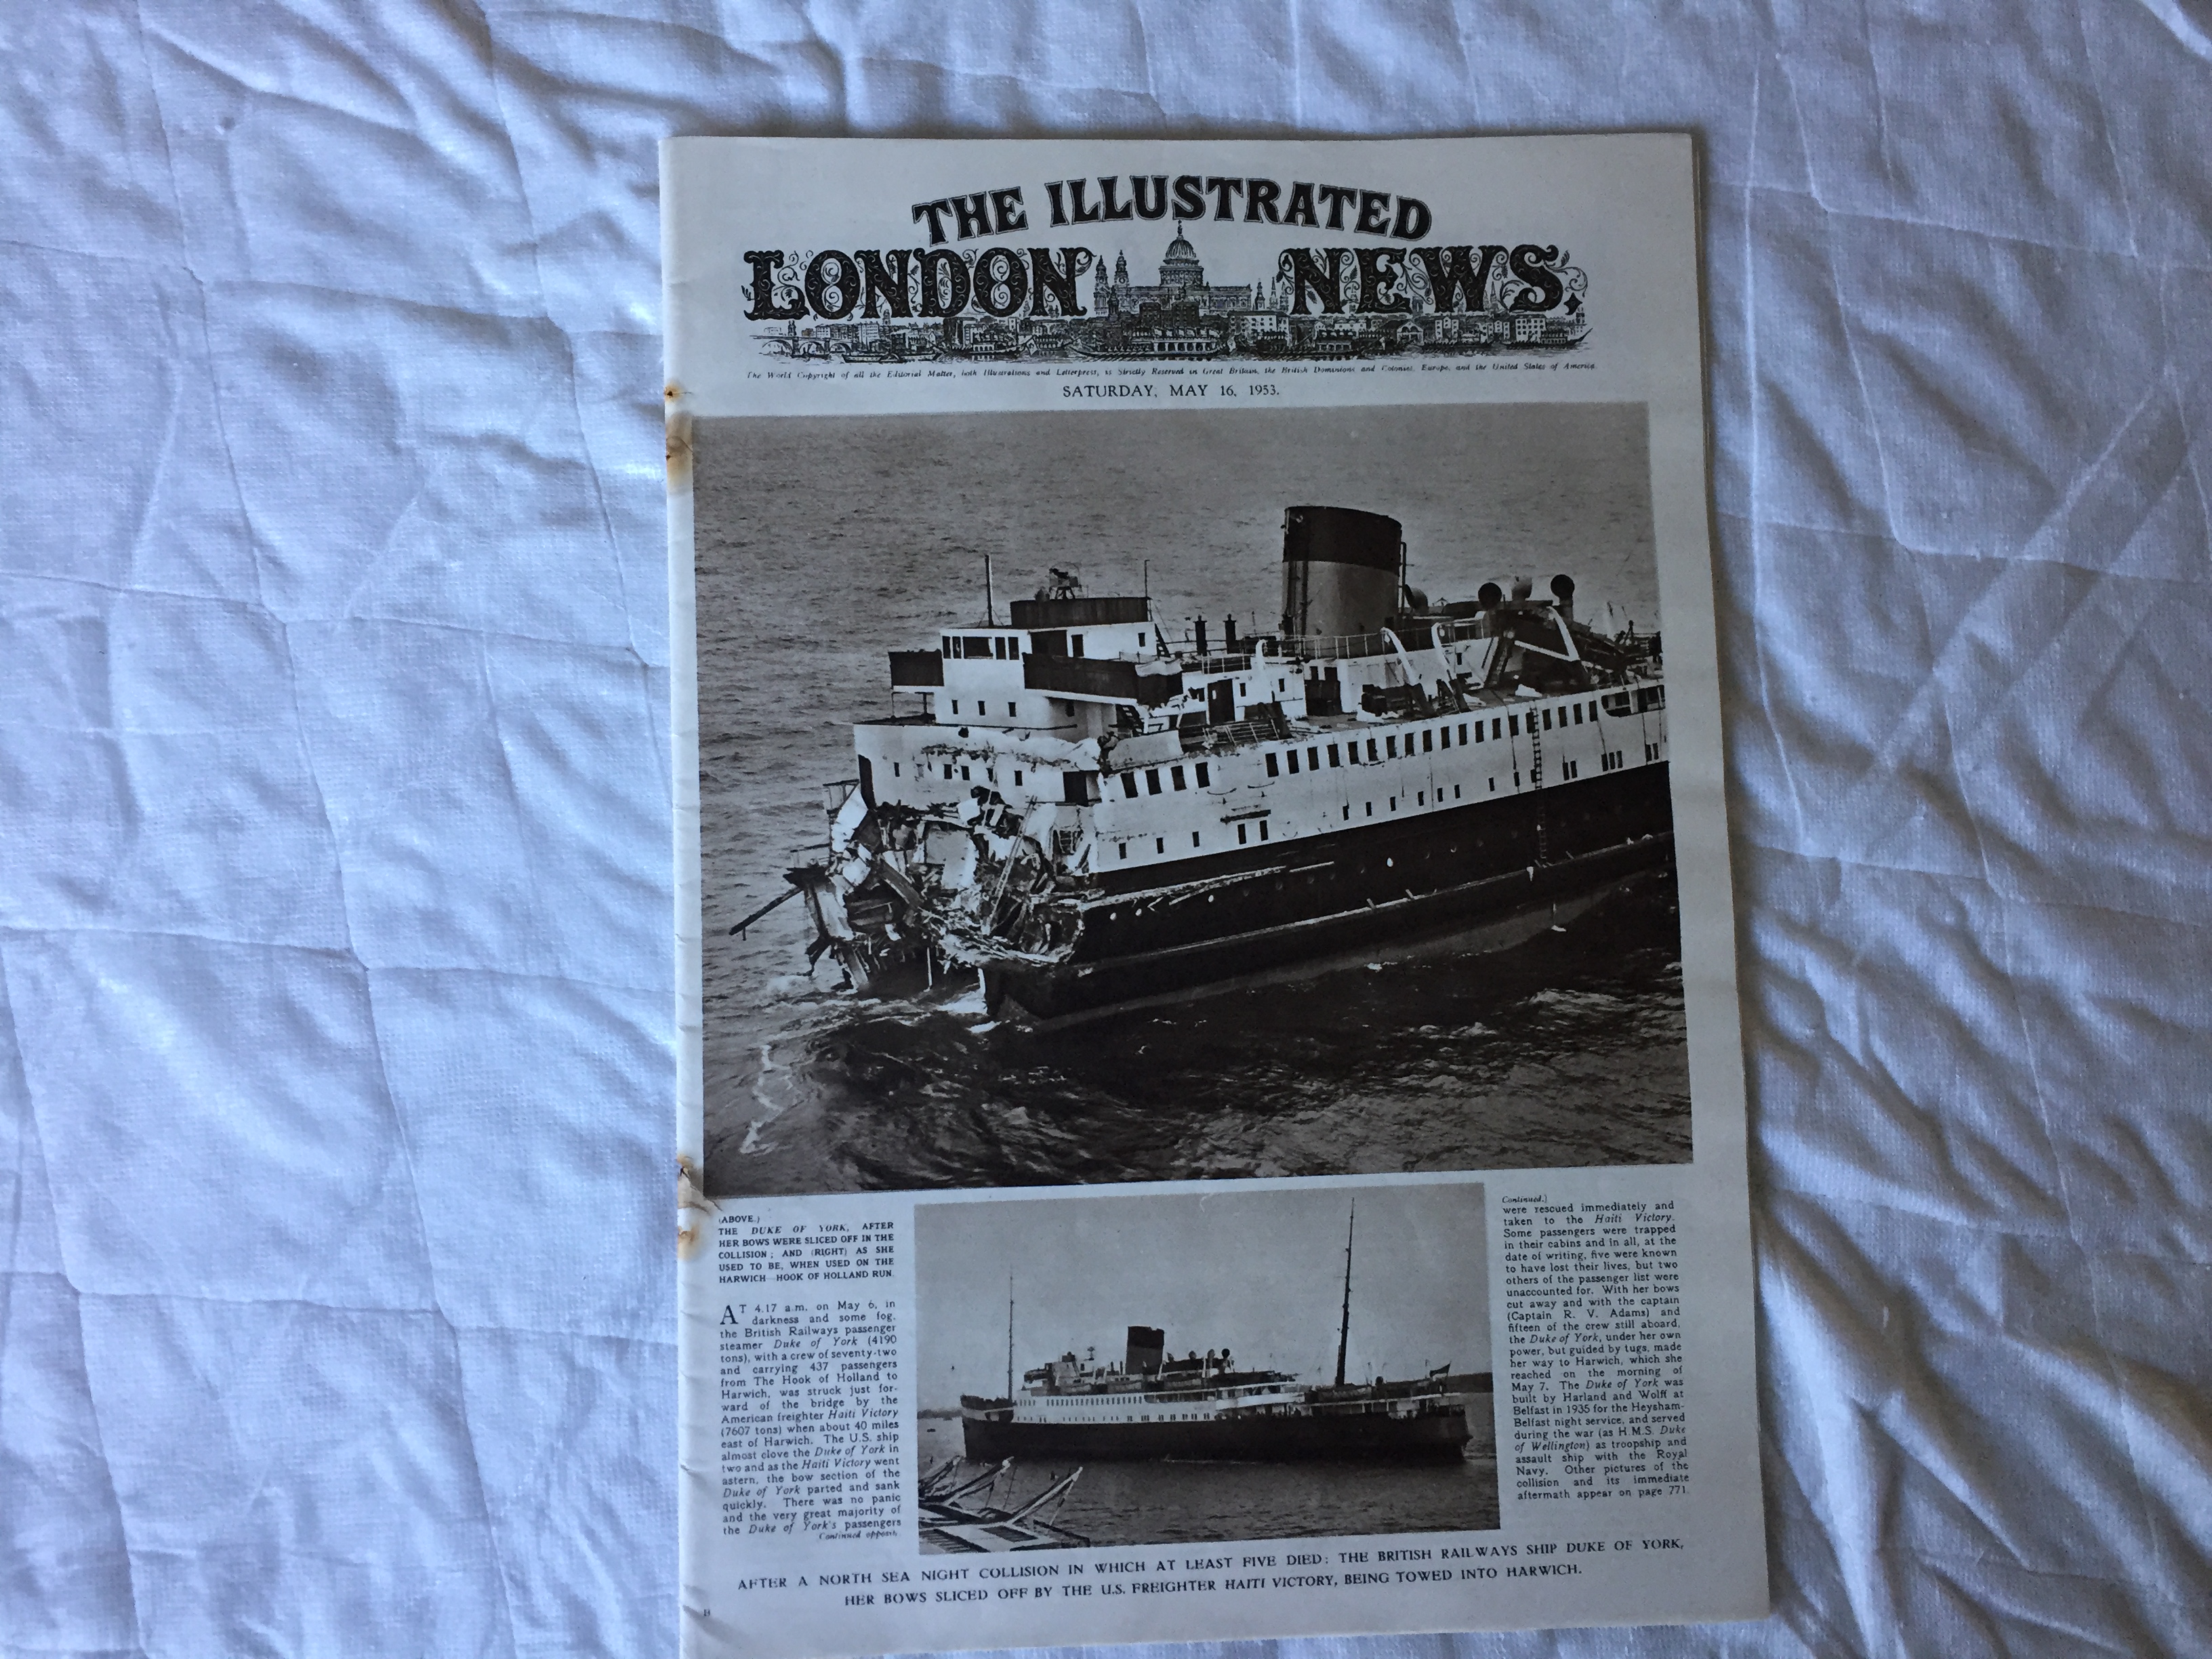 THE VESSEL DUKE OF YORK DISASTER SHOWN IN AN EDITION OF THE ILLUSTRATED LONDON NEWS